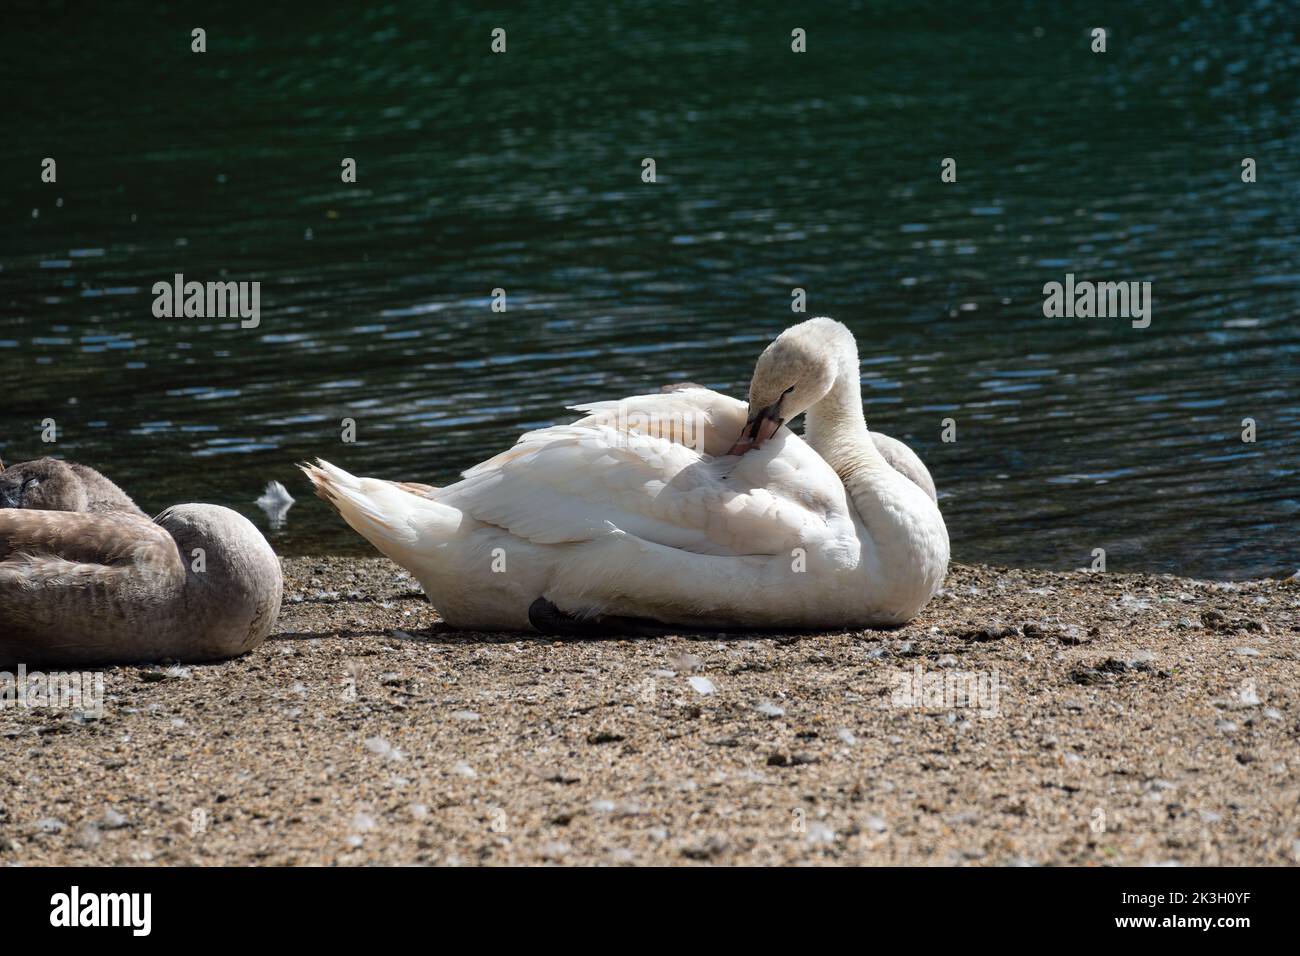 Mute Swan prenning its feathers on the banks of a river Stock Photo